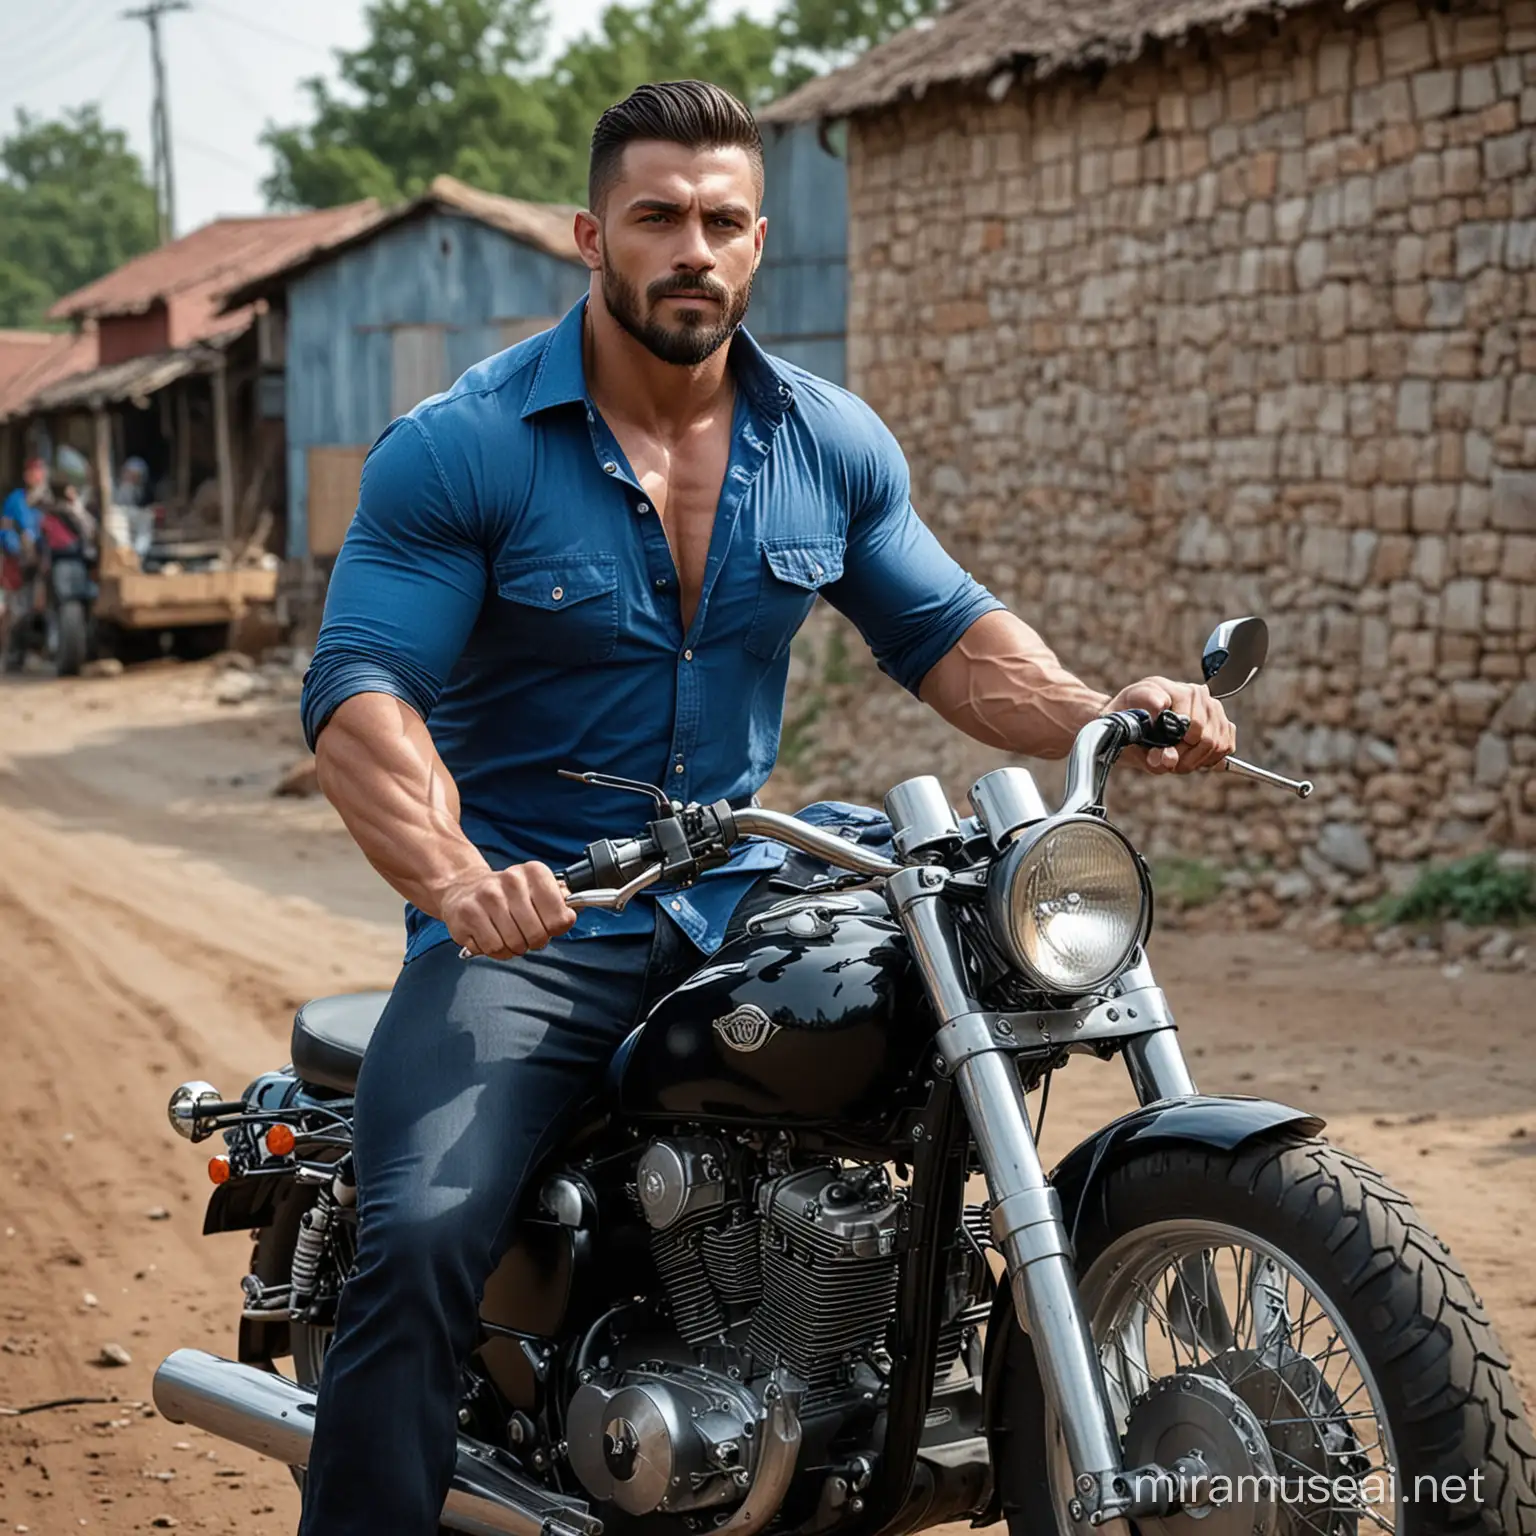 Muscular Men on Motorcycles in a Village Setting